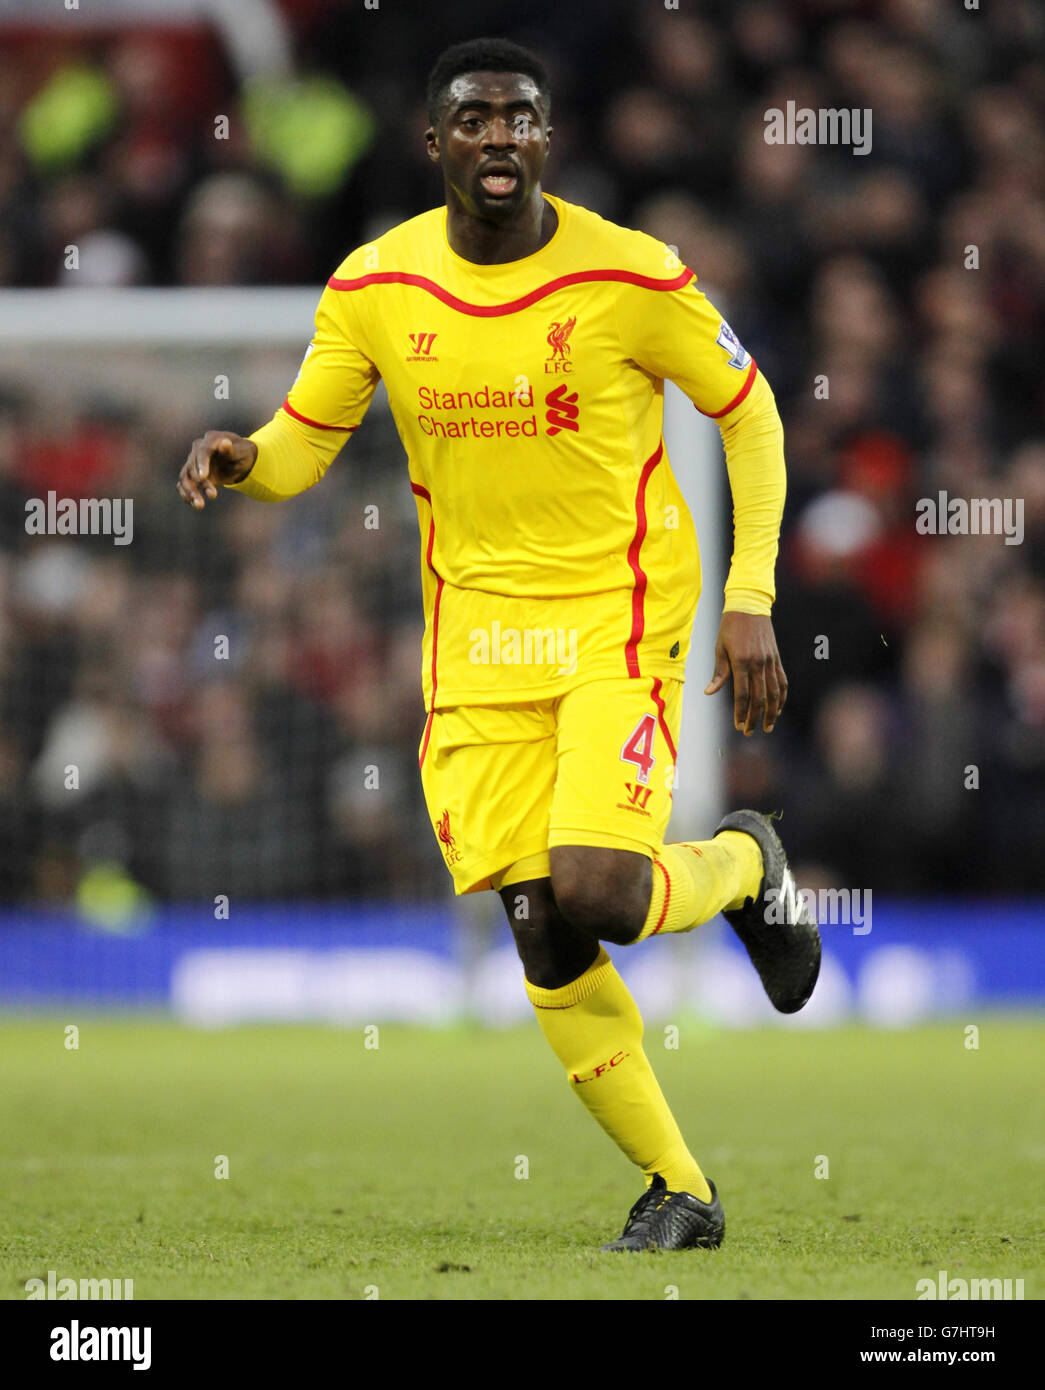 Fußball - Barclays Premier League - Manchester United / Liverpool - Old Trafford. Kolo Toure, Liverpool Stockfoto